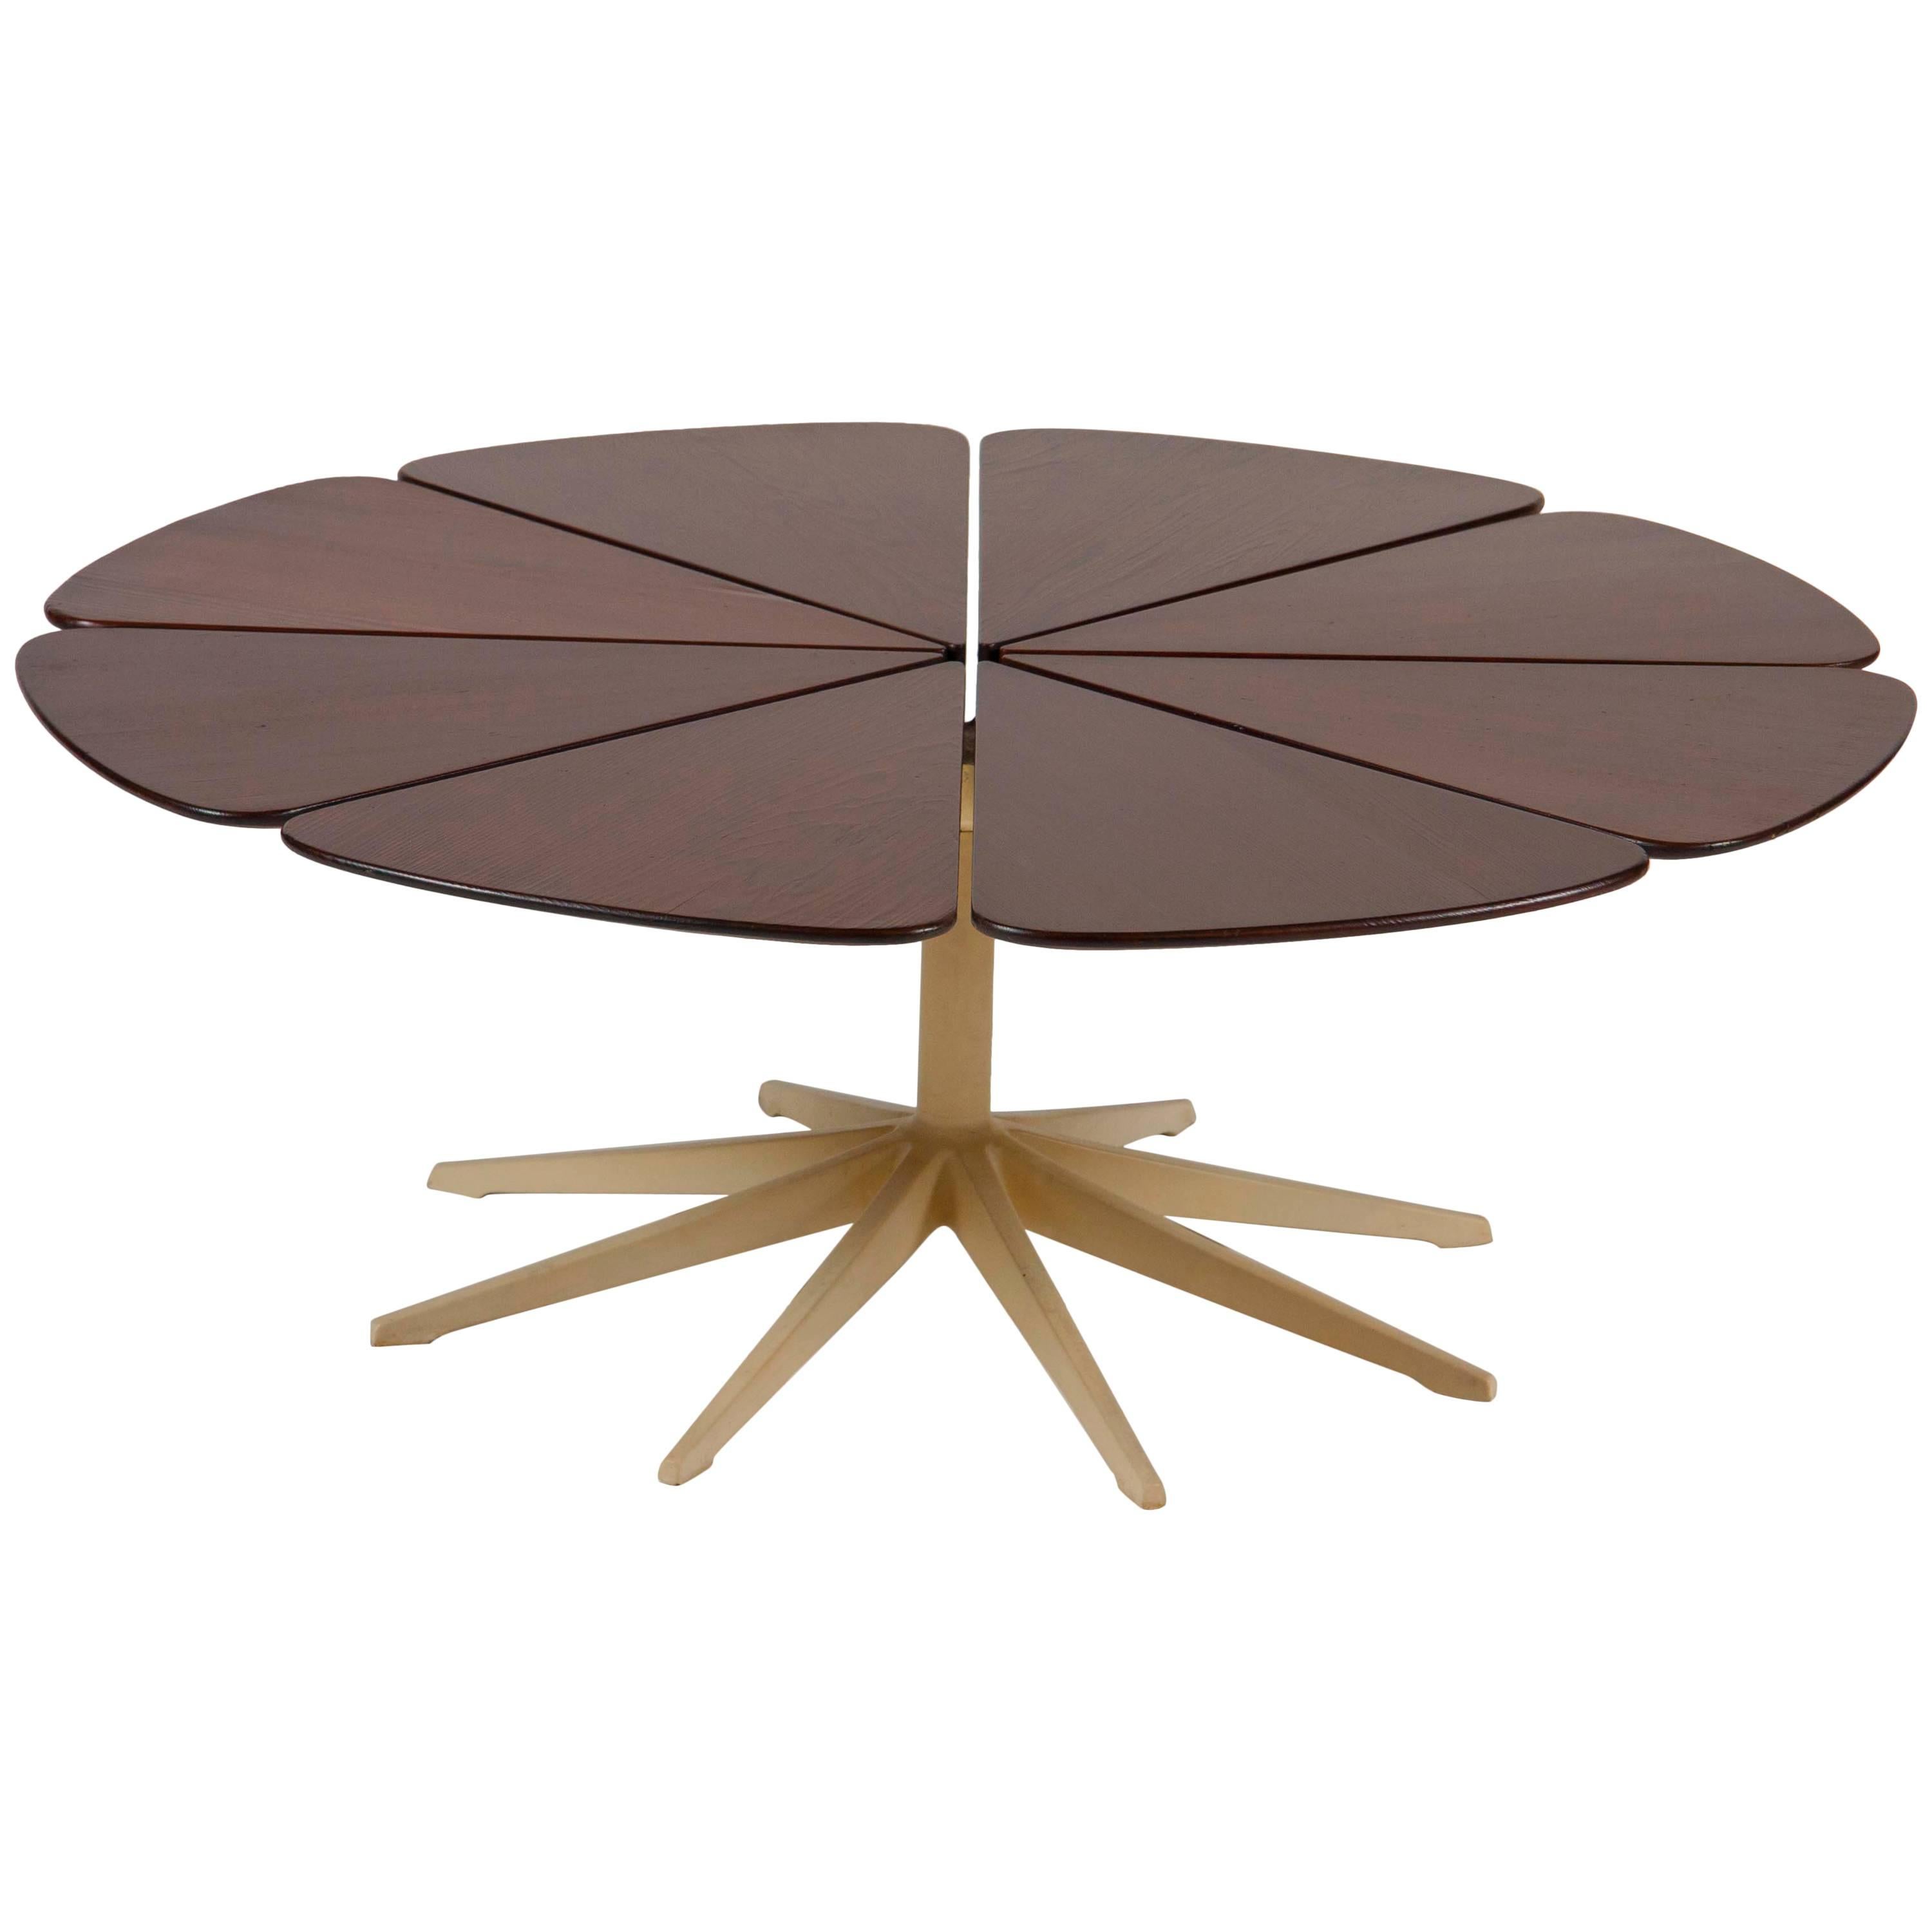 Richard Schultz Redwood Petal Coffee Table Made by Knoll